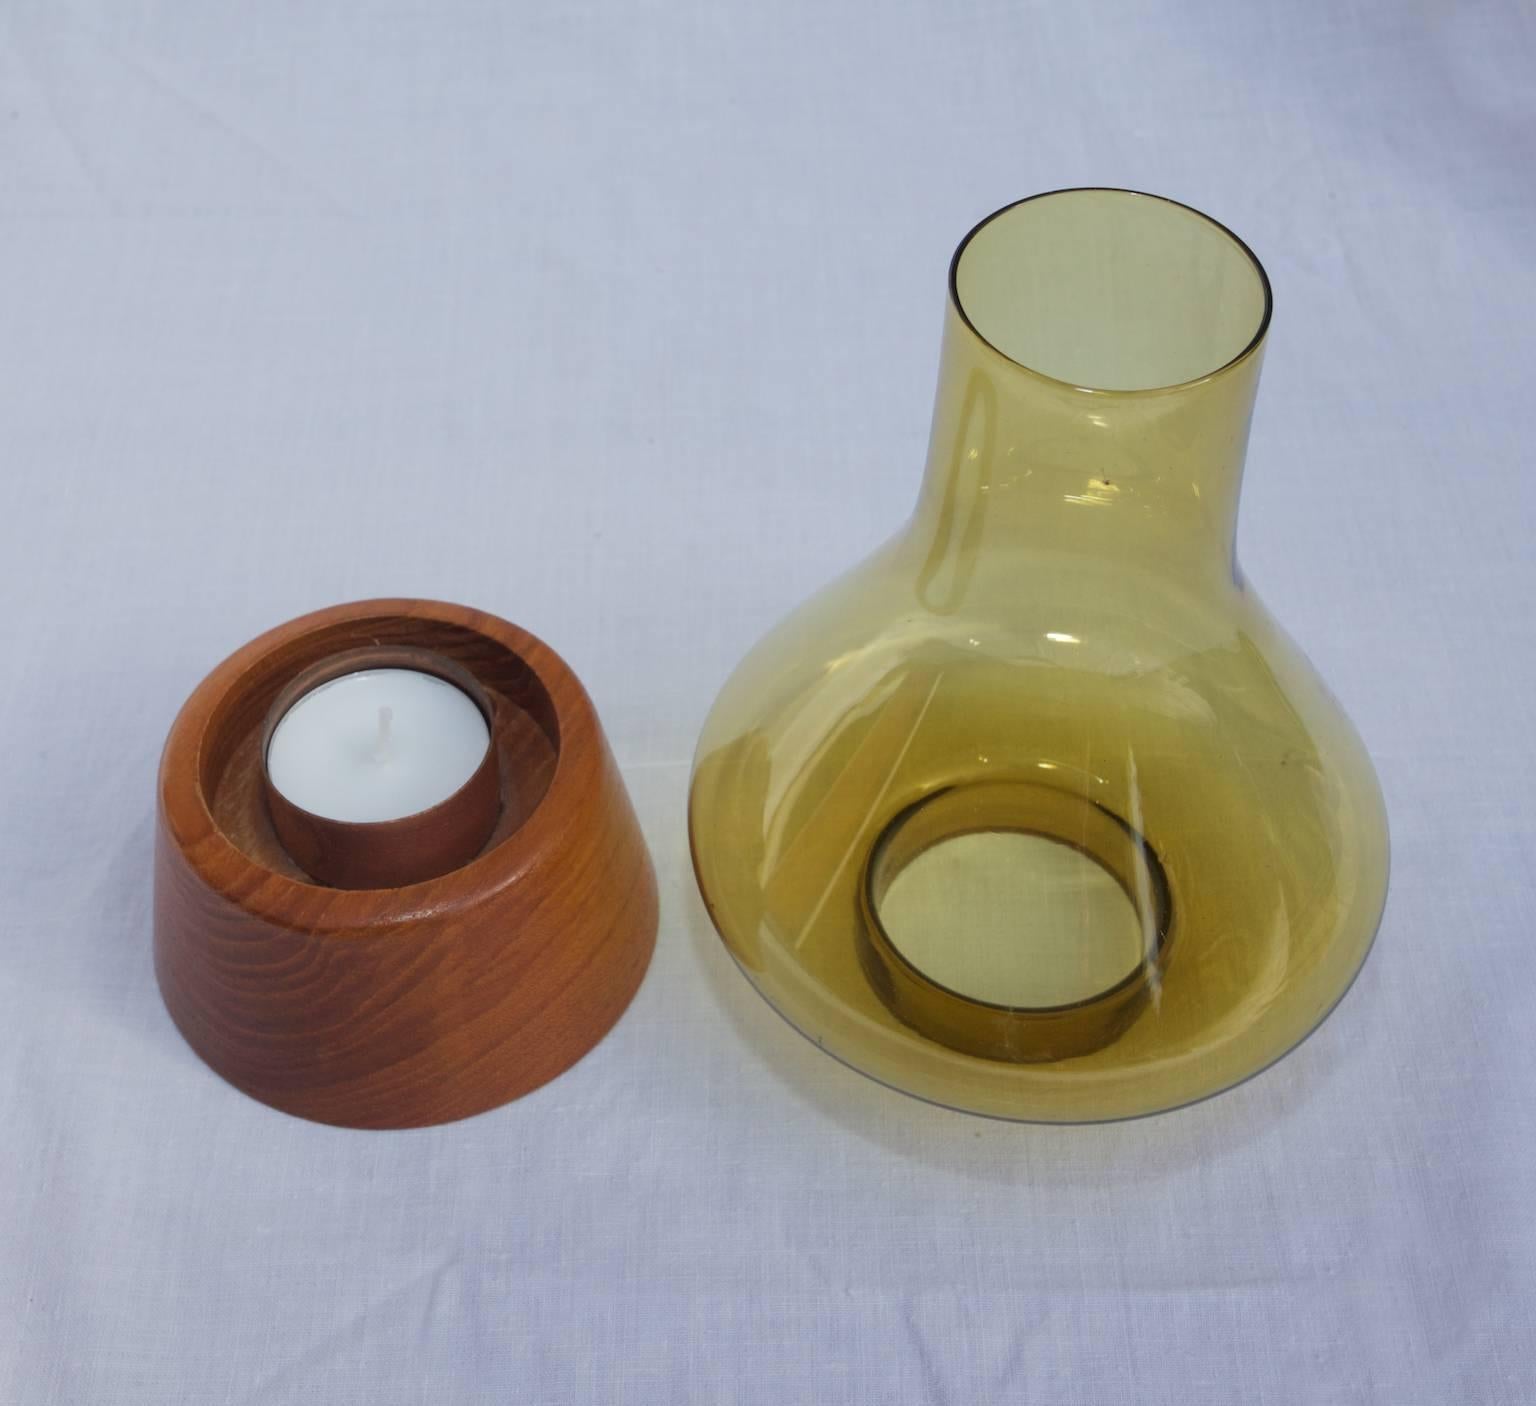 Candleholder, Teak, Glass and Copper by Karl Holmberg 1960s-1970s, Swedish In Excellent Condition For Sale In Malmo, SE